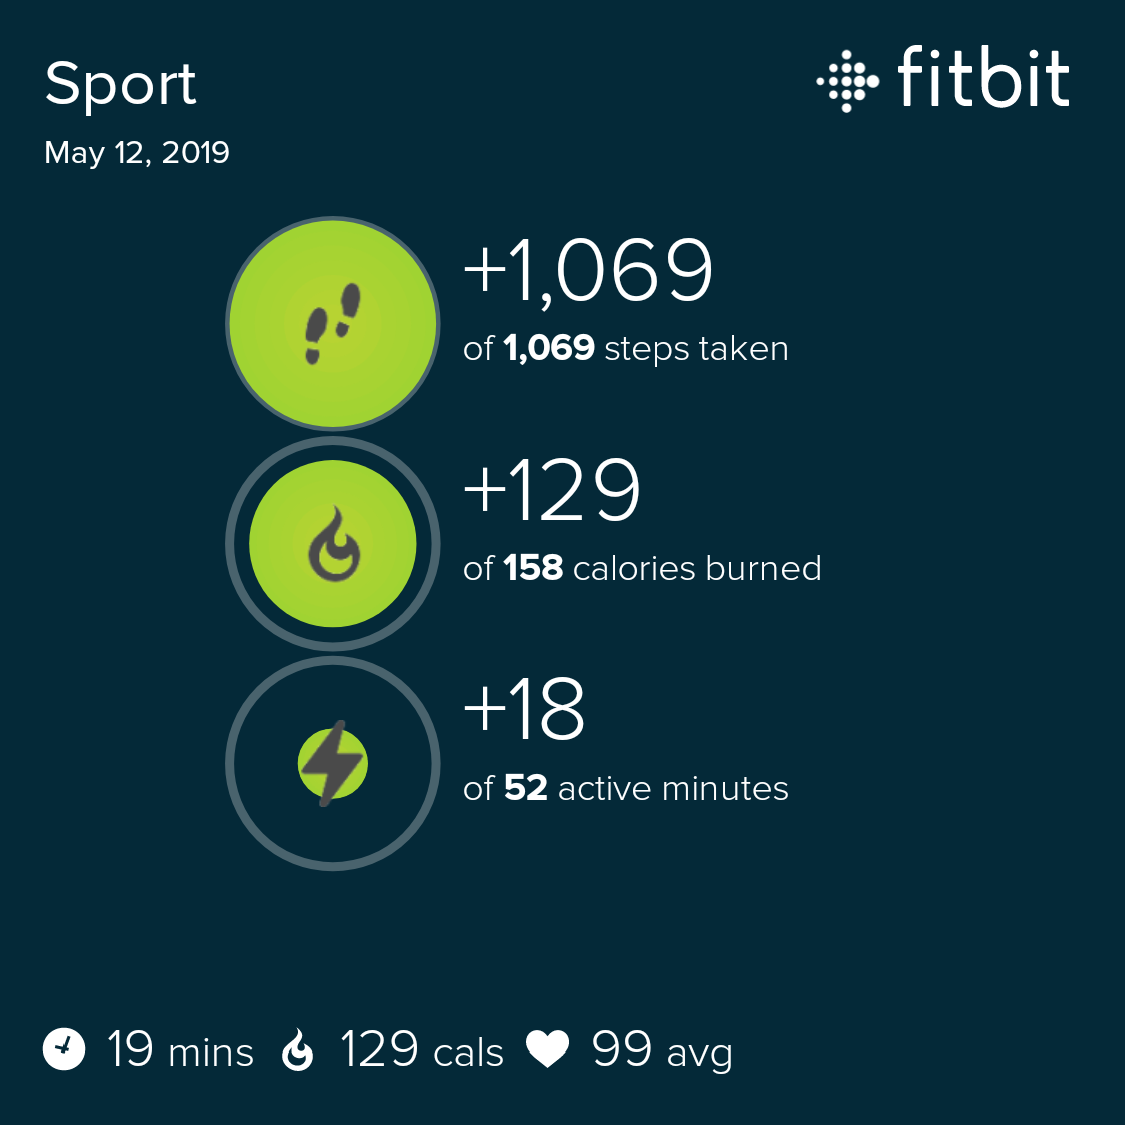 fitbit_sharing_3827231958631076593.png